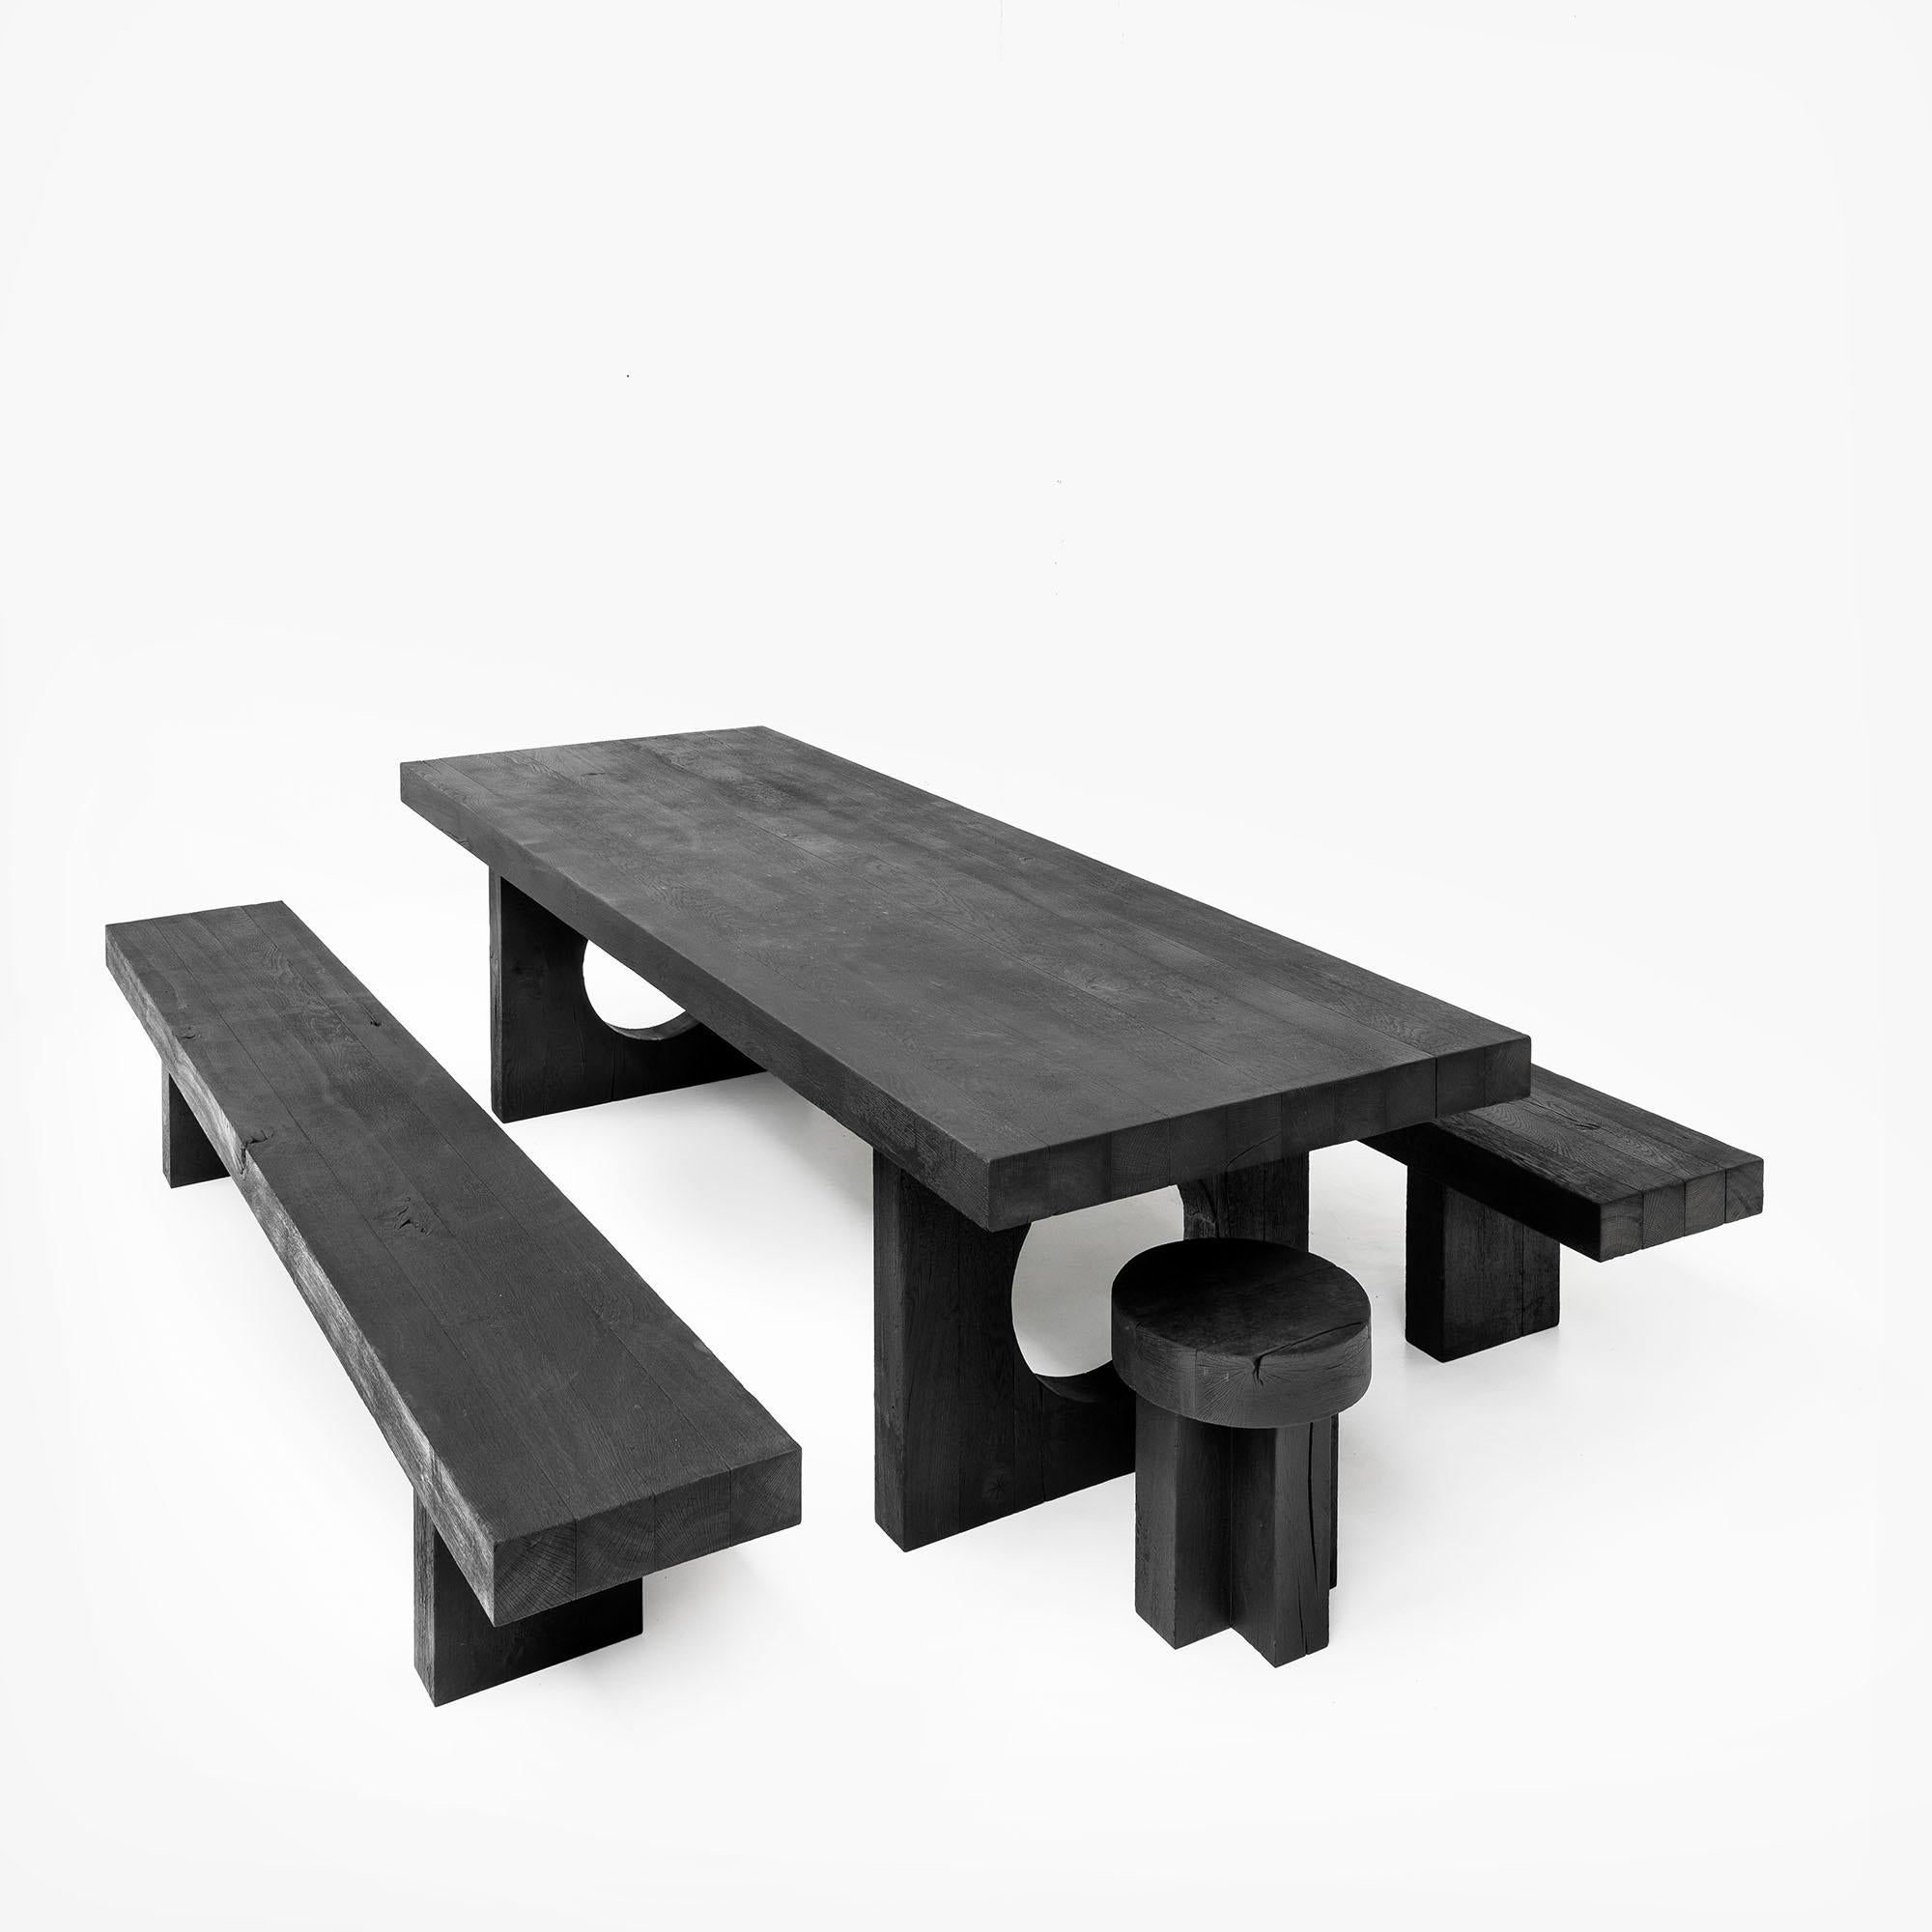 The Kurai Collection consists of a solid oak dining table, two benches and two stools finished with the Shou Sugi Ban technique.
Burning the wood creates an intense black color and at the same time protects it against wind and weather.
This old